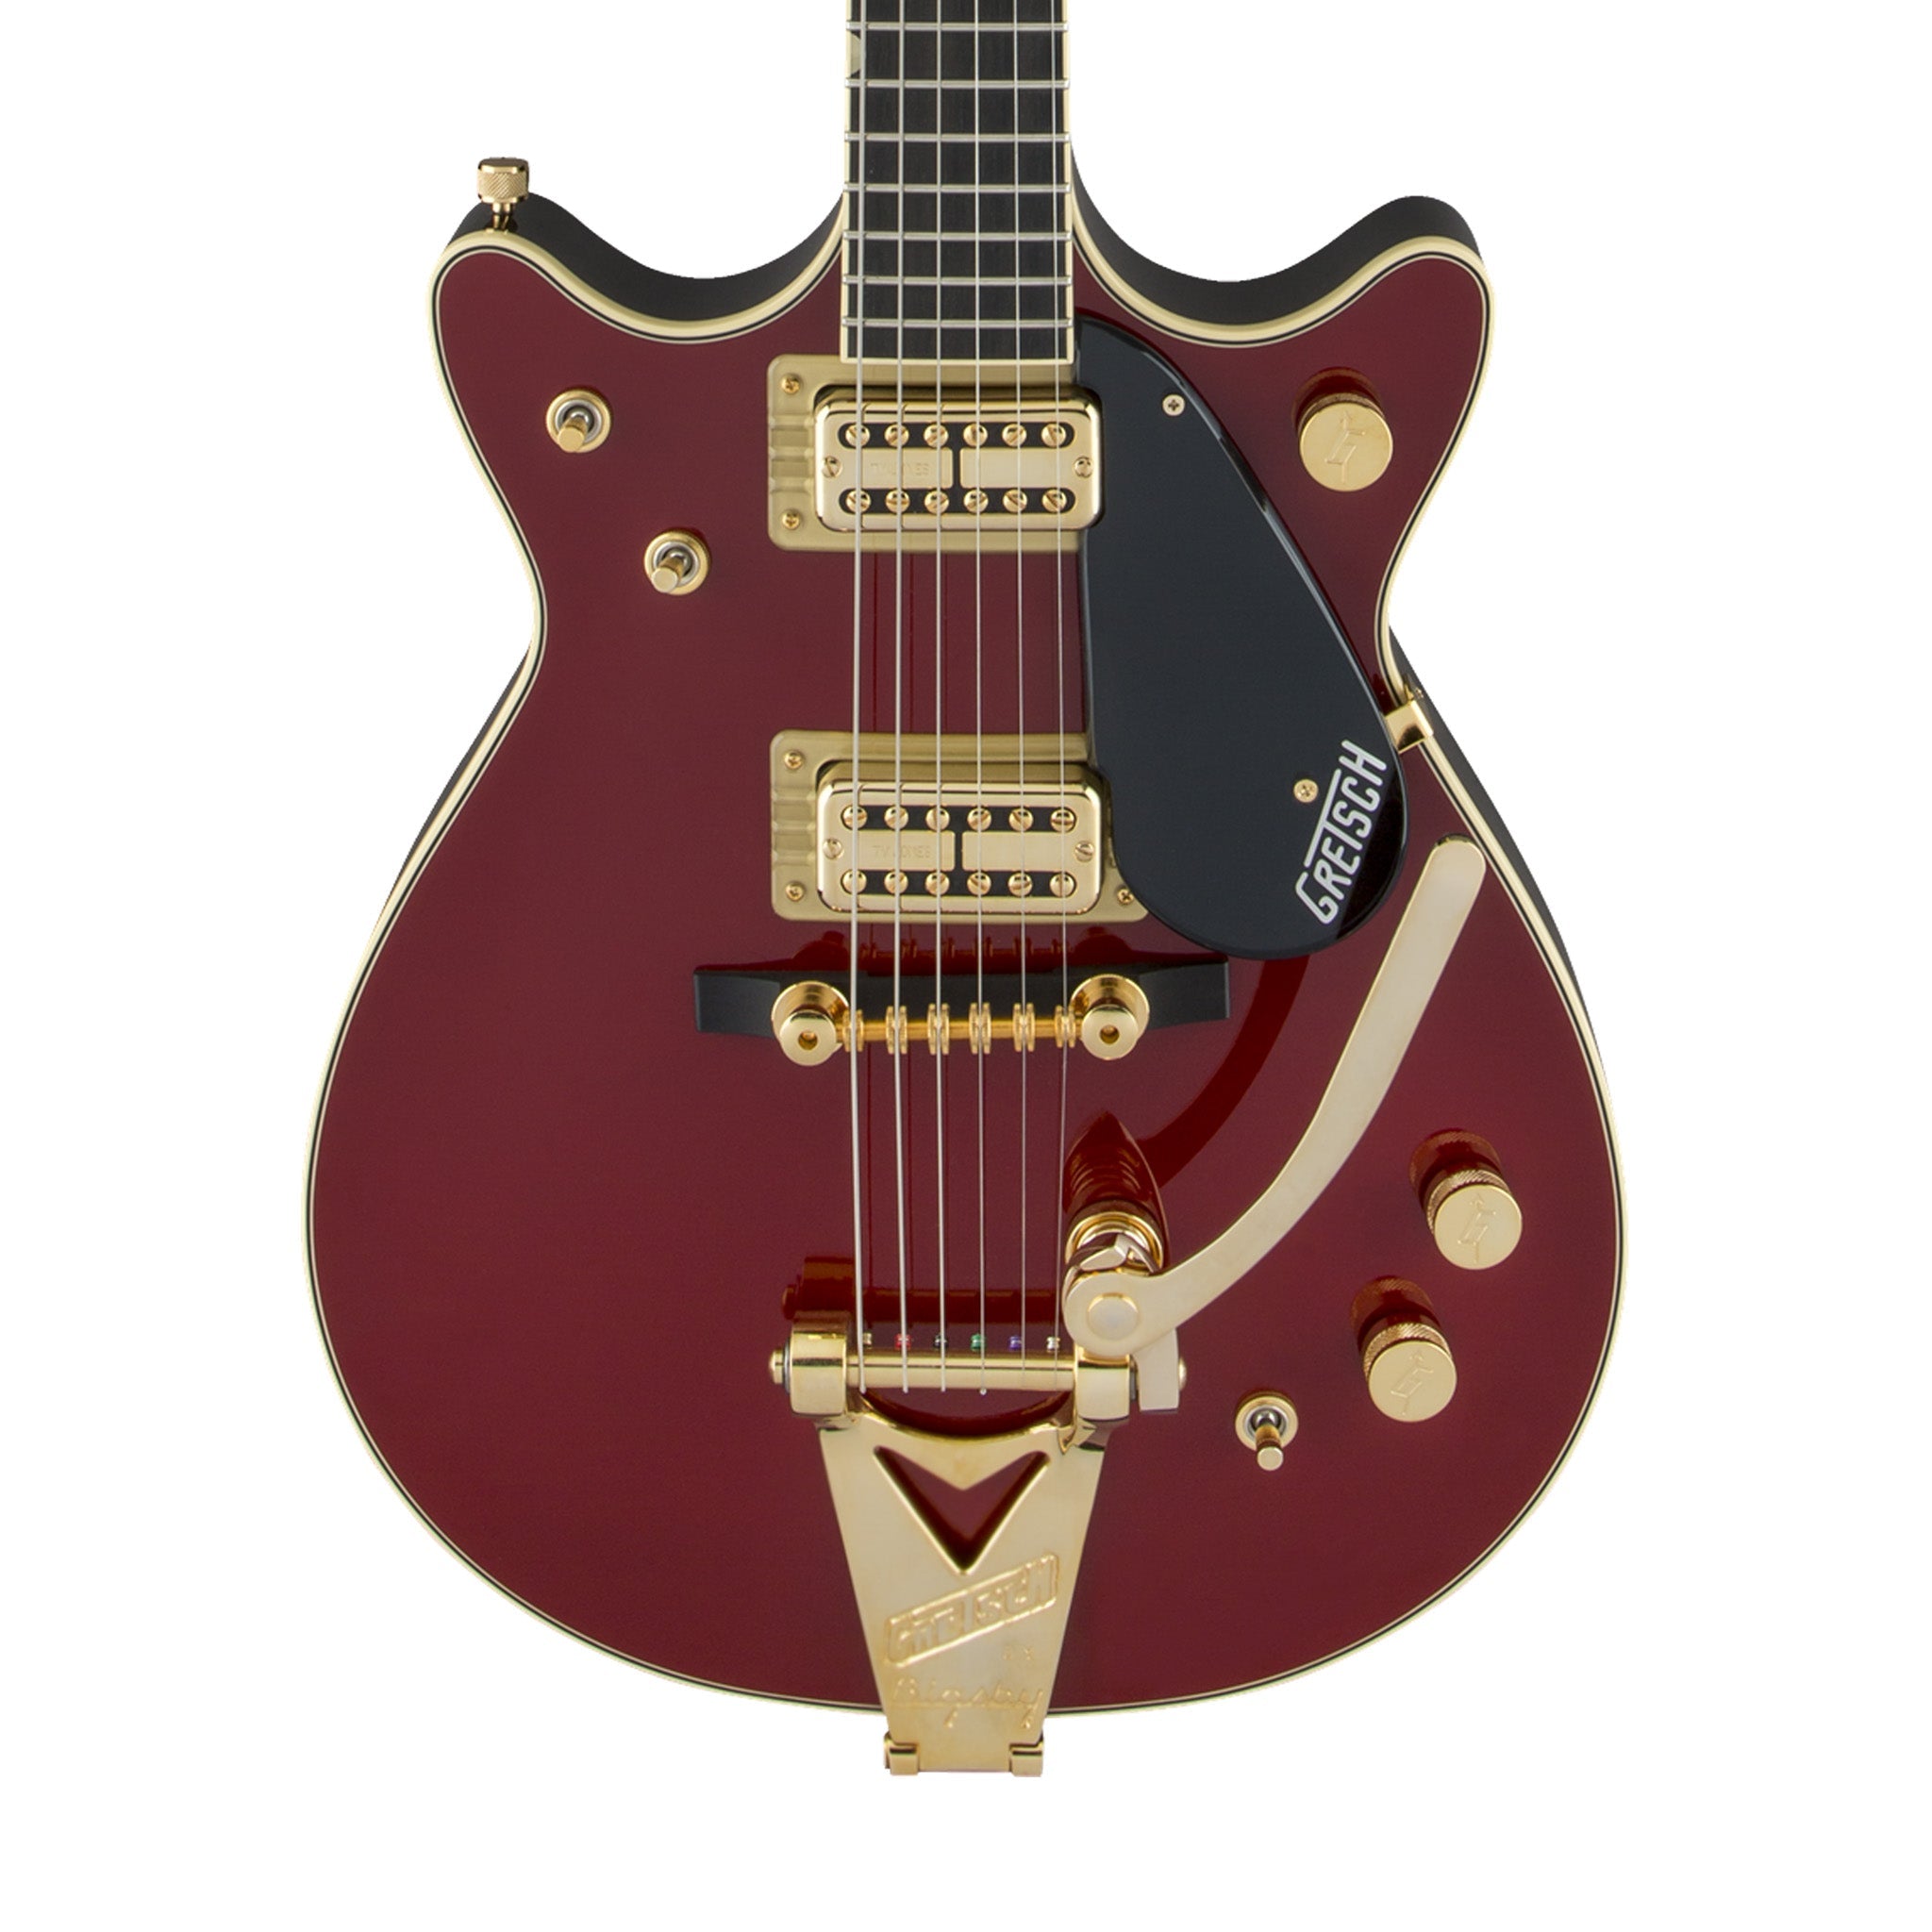 Gretsch G6131T-62 Vintage Select Edition 62 Duo Jet Electric Guitar, Firebird Red | Zoso Music Sdn Bhd